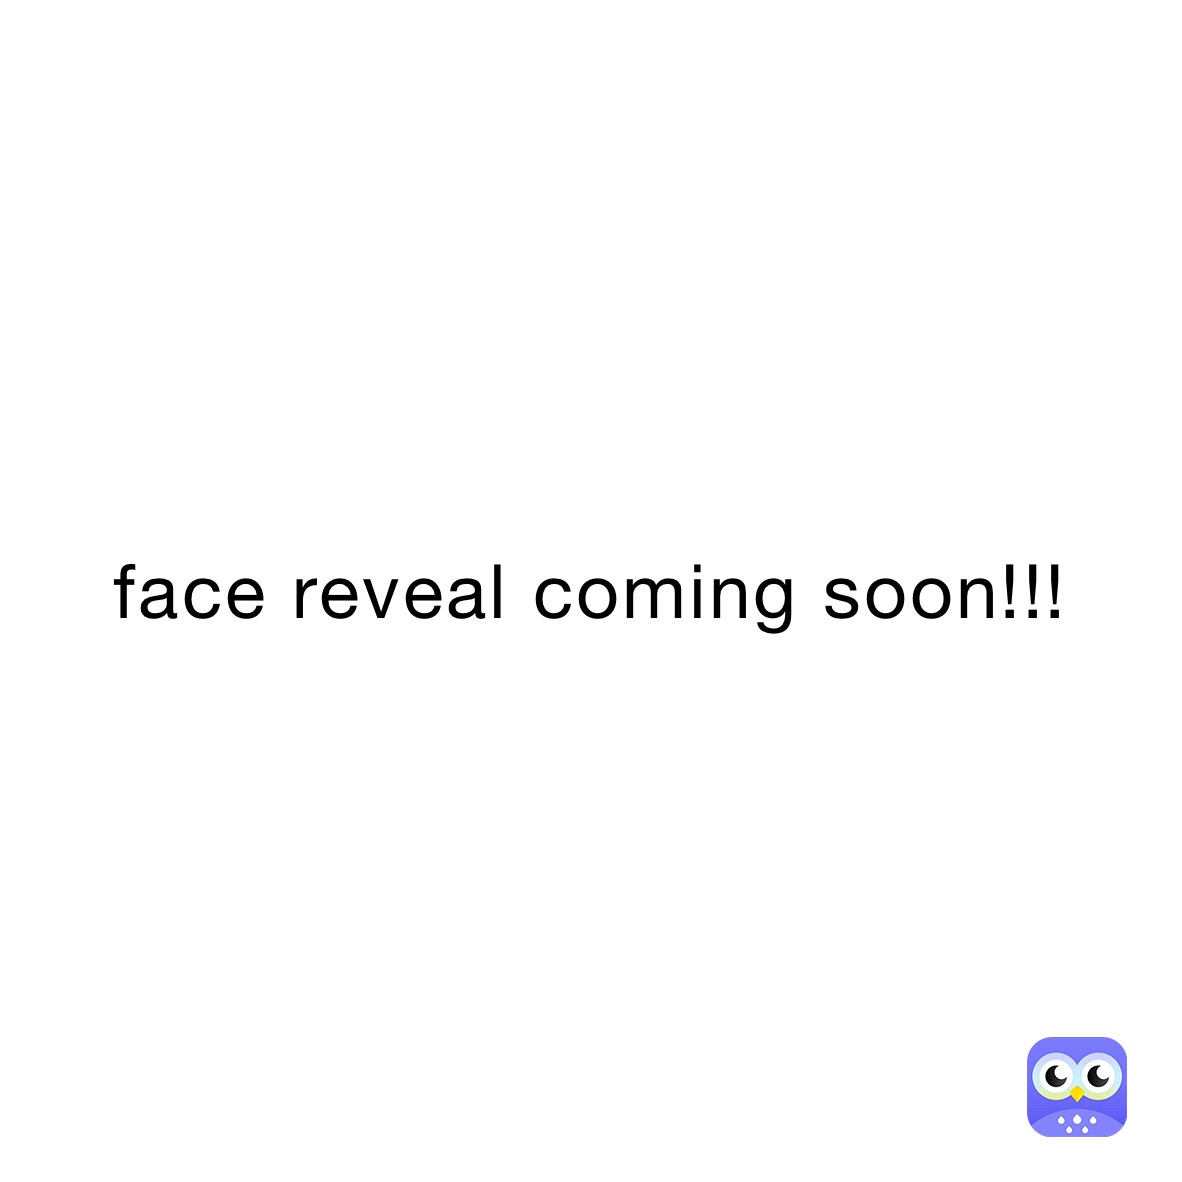 face reveal coming soon!!!